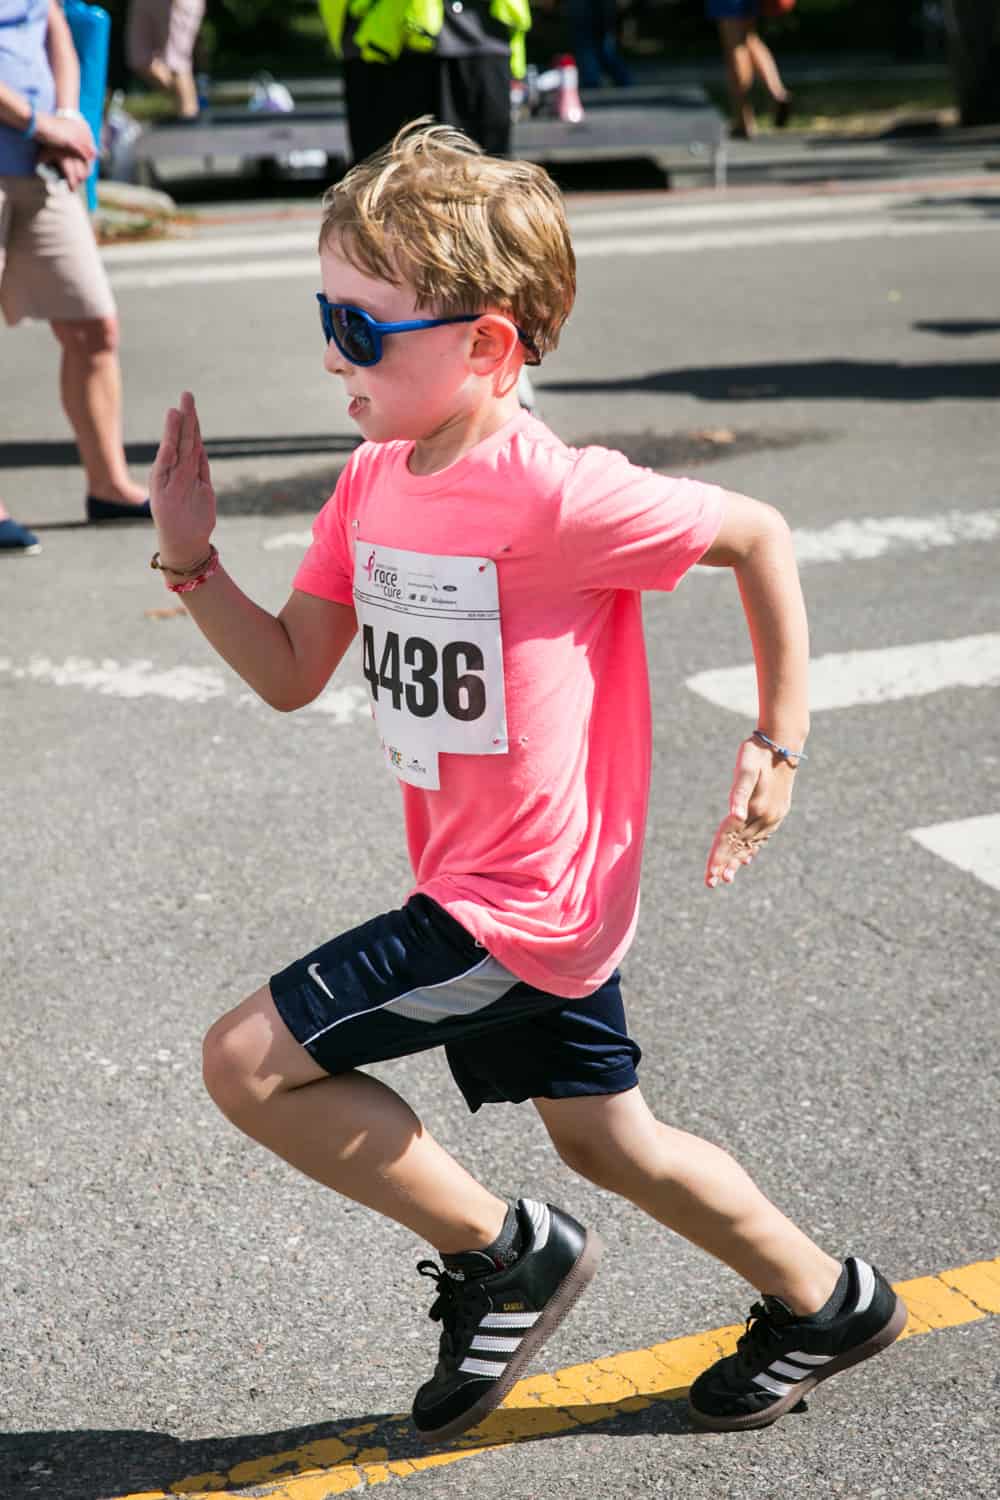 NYC Race for the Cure photos of young boy in sunglasses crossing finish line